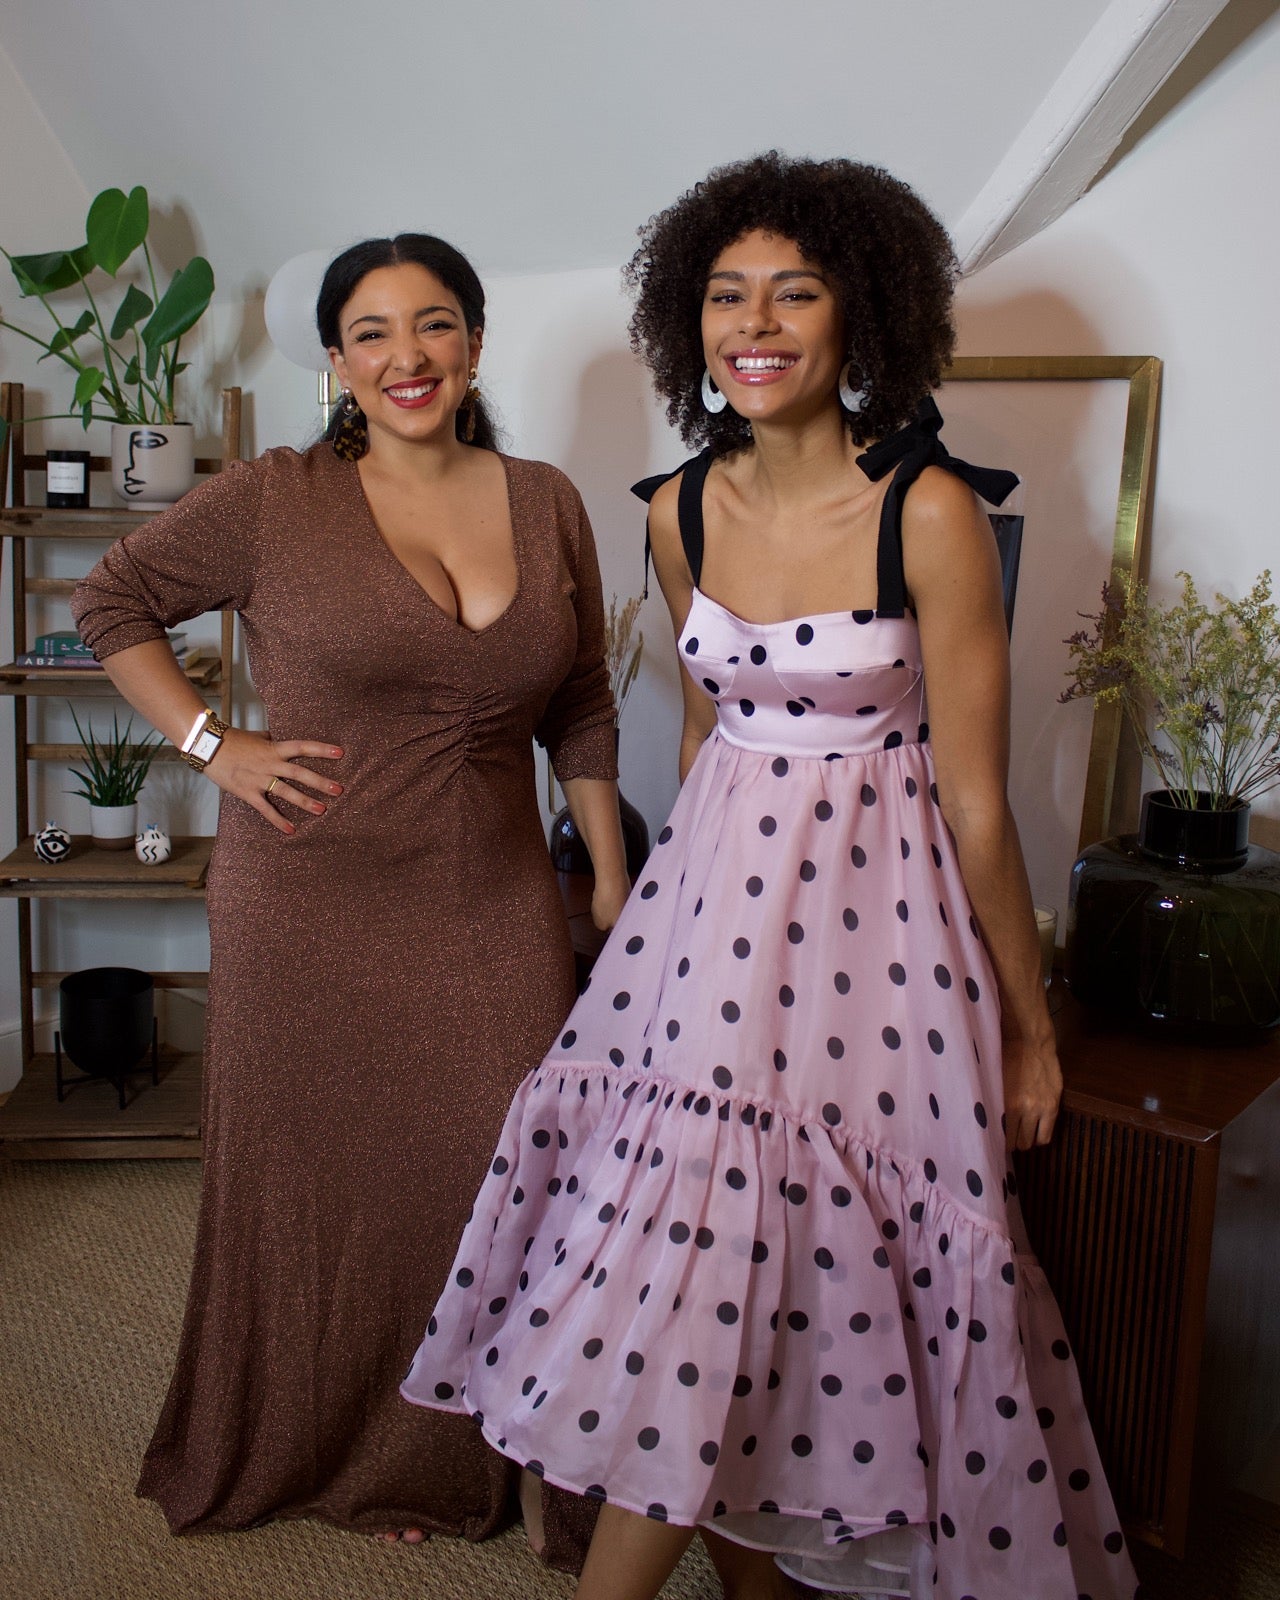 Sustainably Influenced Podcast co-founders, Bianca F Foley and Charlotte Williams, standing smiling at the camera in a living room. They both wear rented dresses; Bianca wears a chocolate sparkly v-neck dress, and Charlotte wears a lilac and black polka dot strap dress with a ruffle hem. 